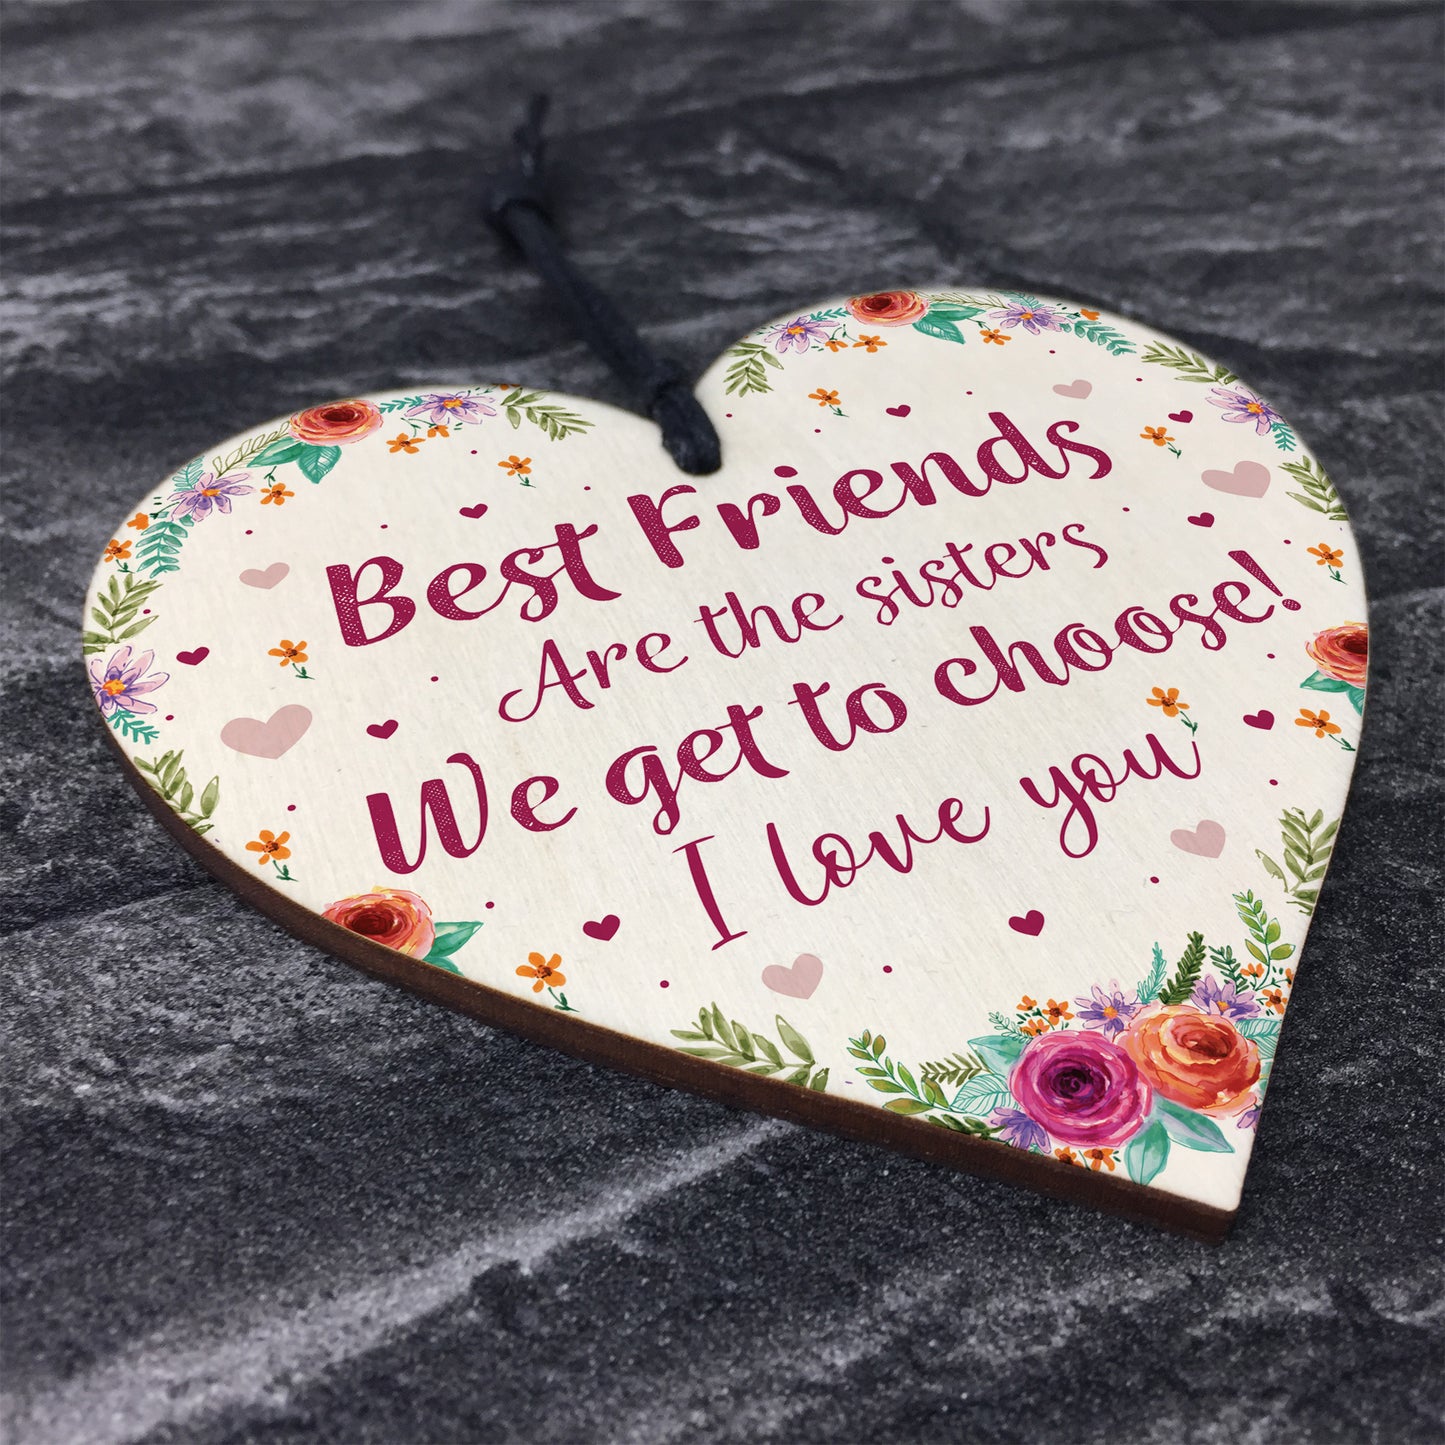 Best FRIEND Sister Gifts Wooden Heart Birthday Christmas Gift